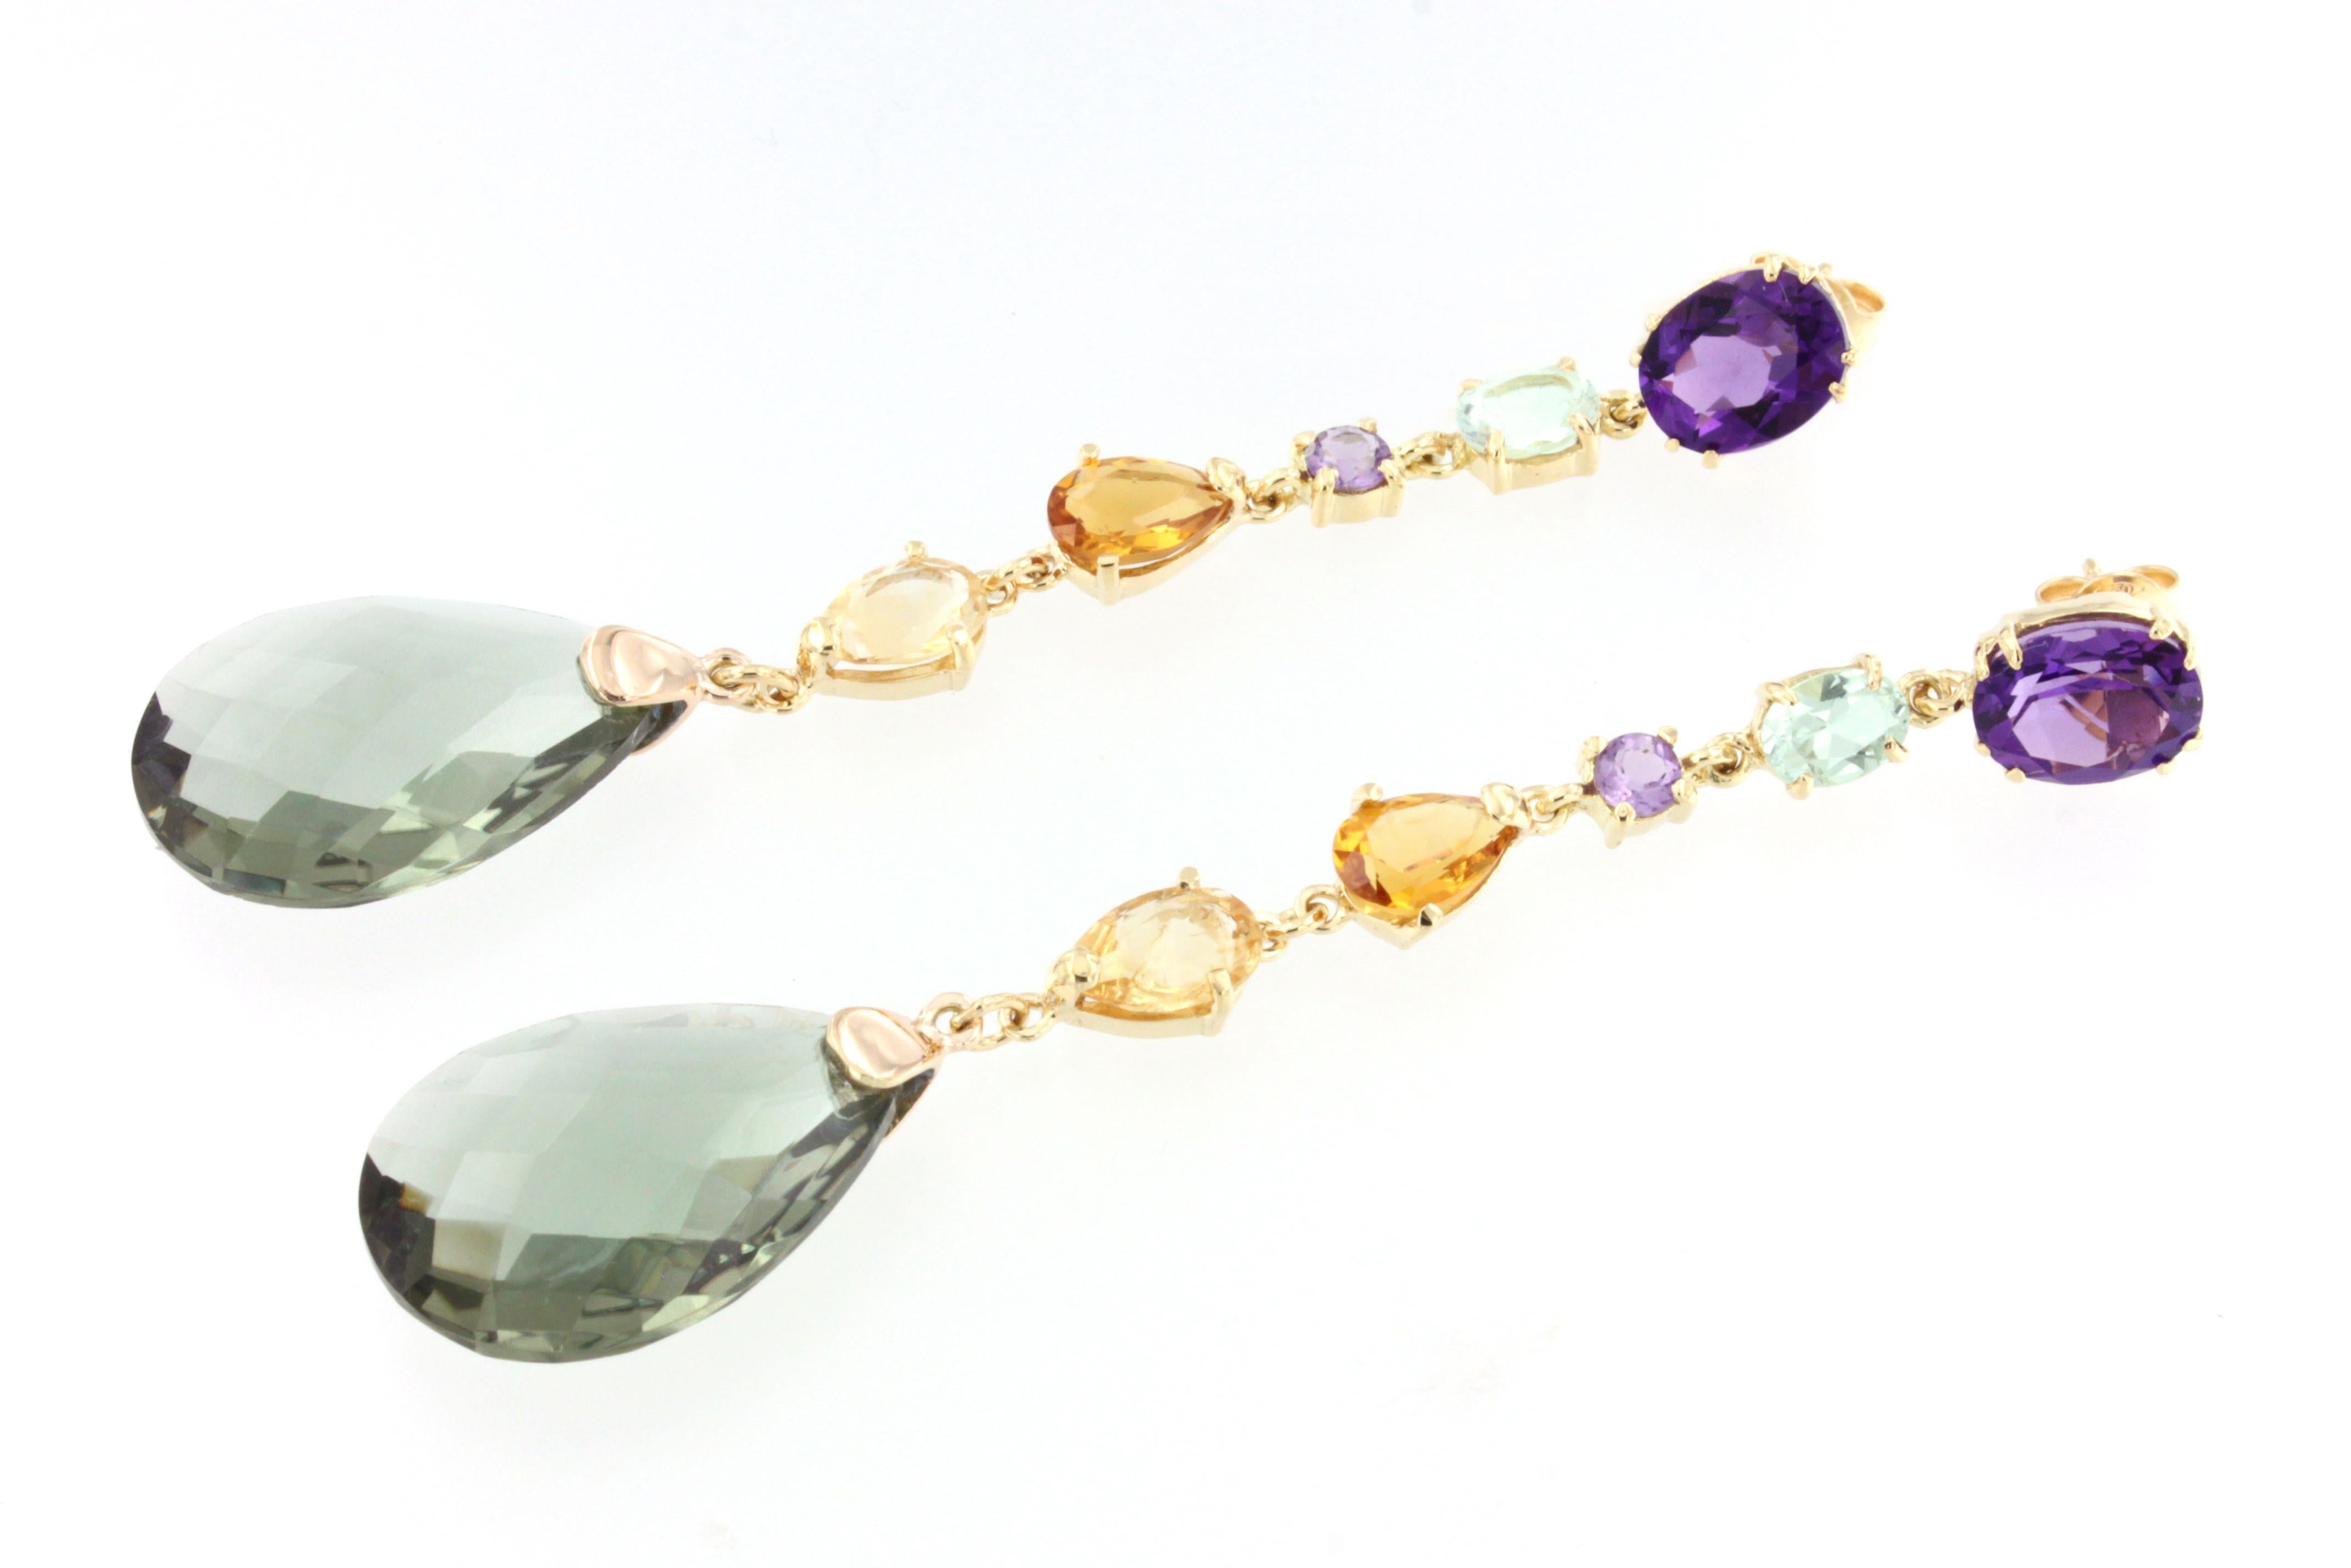  Timeless earrings are the perfect finishing touch to any look.

yellow gold 18kt    Stones: Amethyst, Citrine, Prasiolite    cm 8,5   g.17,00

All Stanoppi Jewelry is new and has never been previously owned or worn. Each item will arrive at your